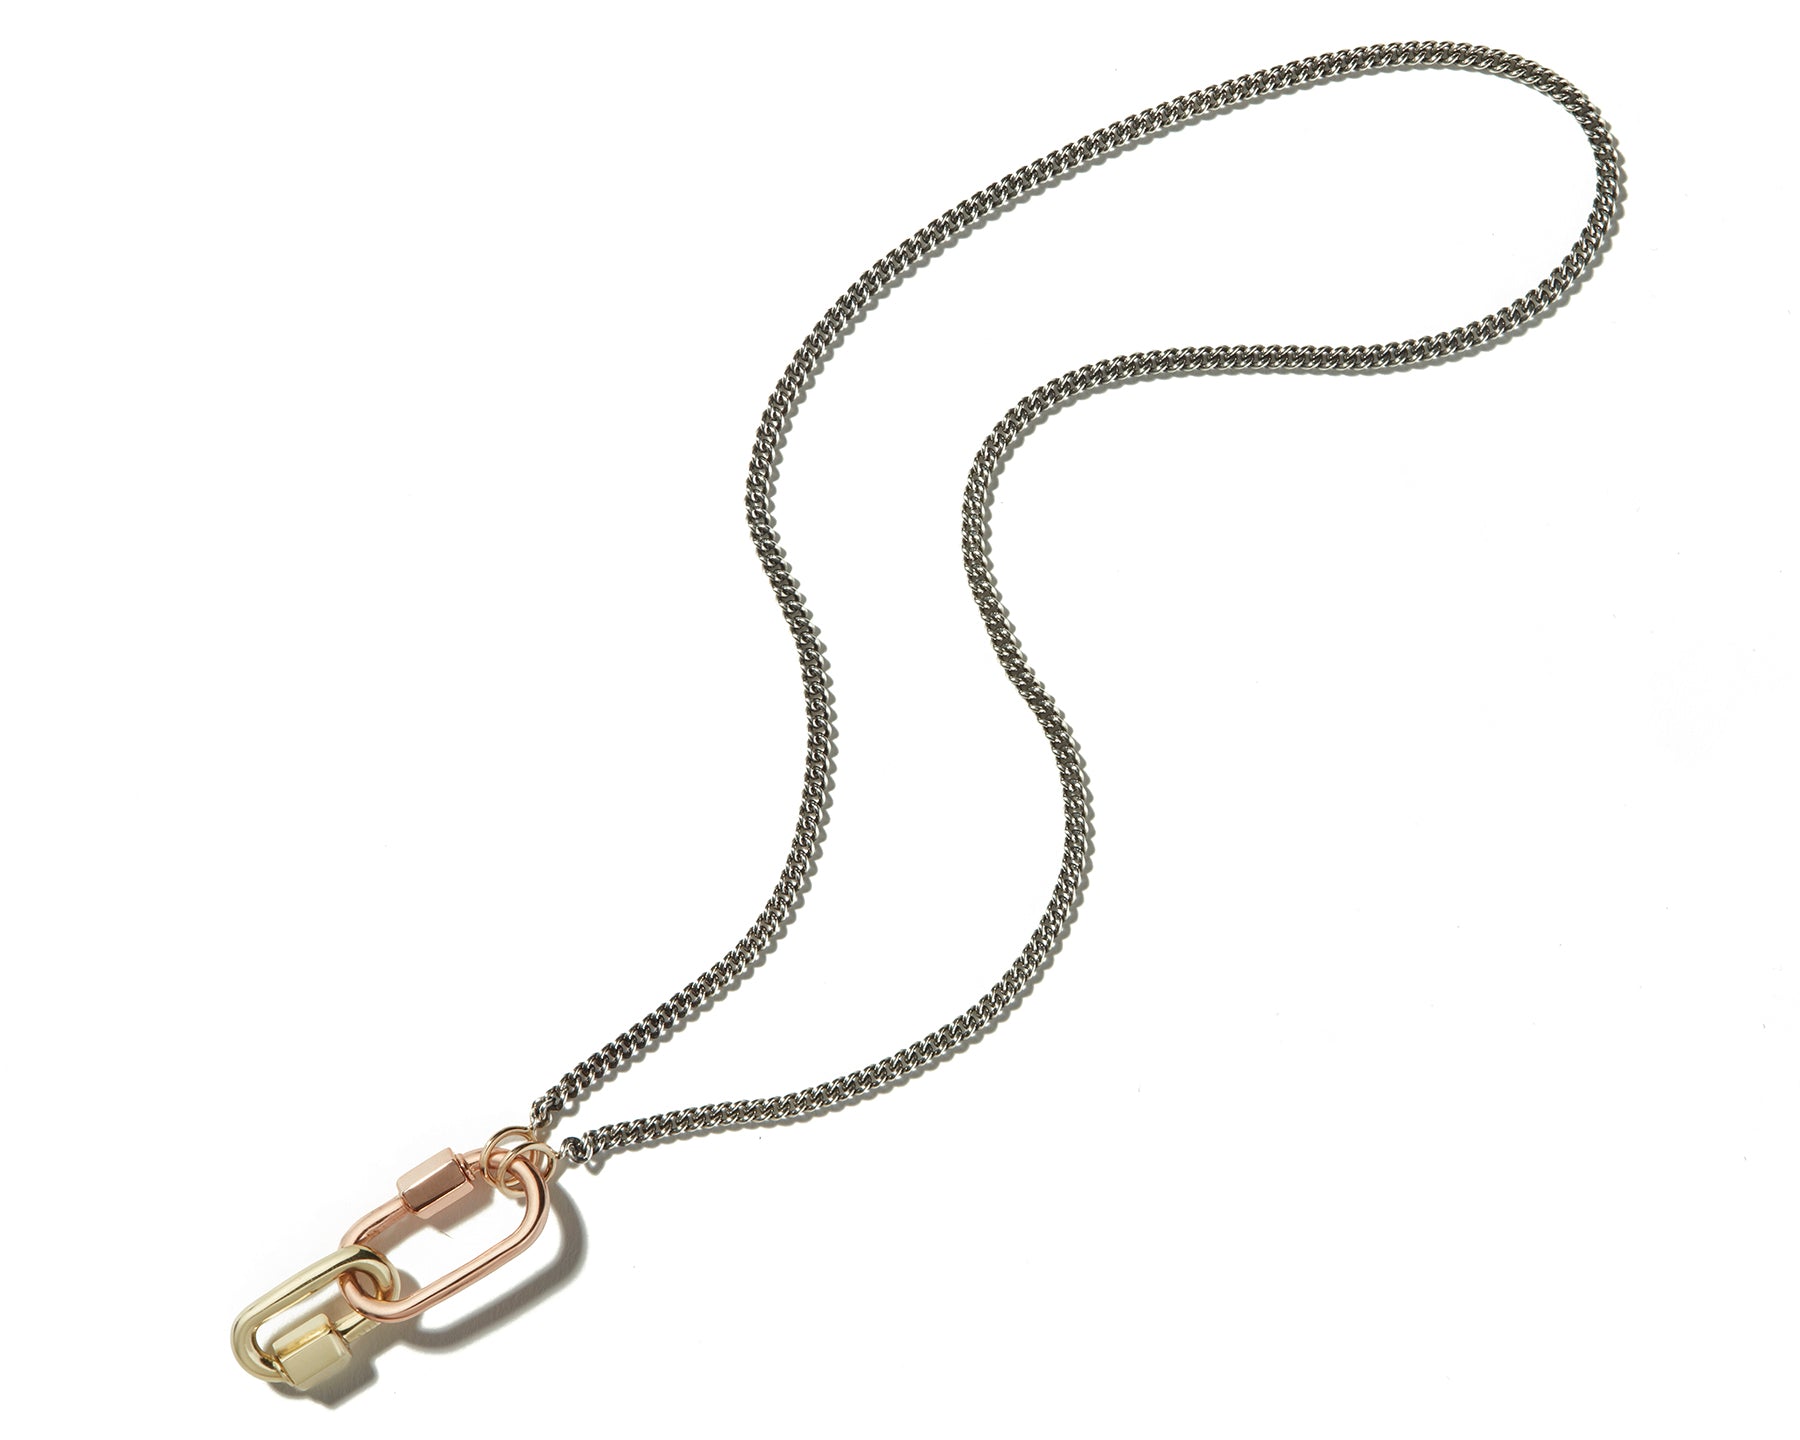 Dainty chain necklace with rose gold lock charm and gold lock charm